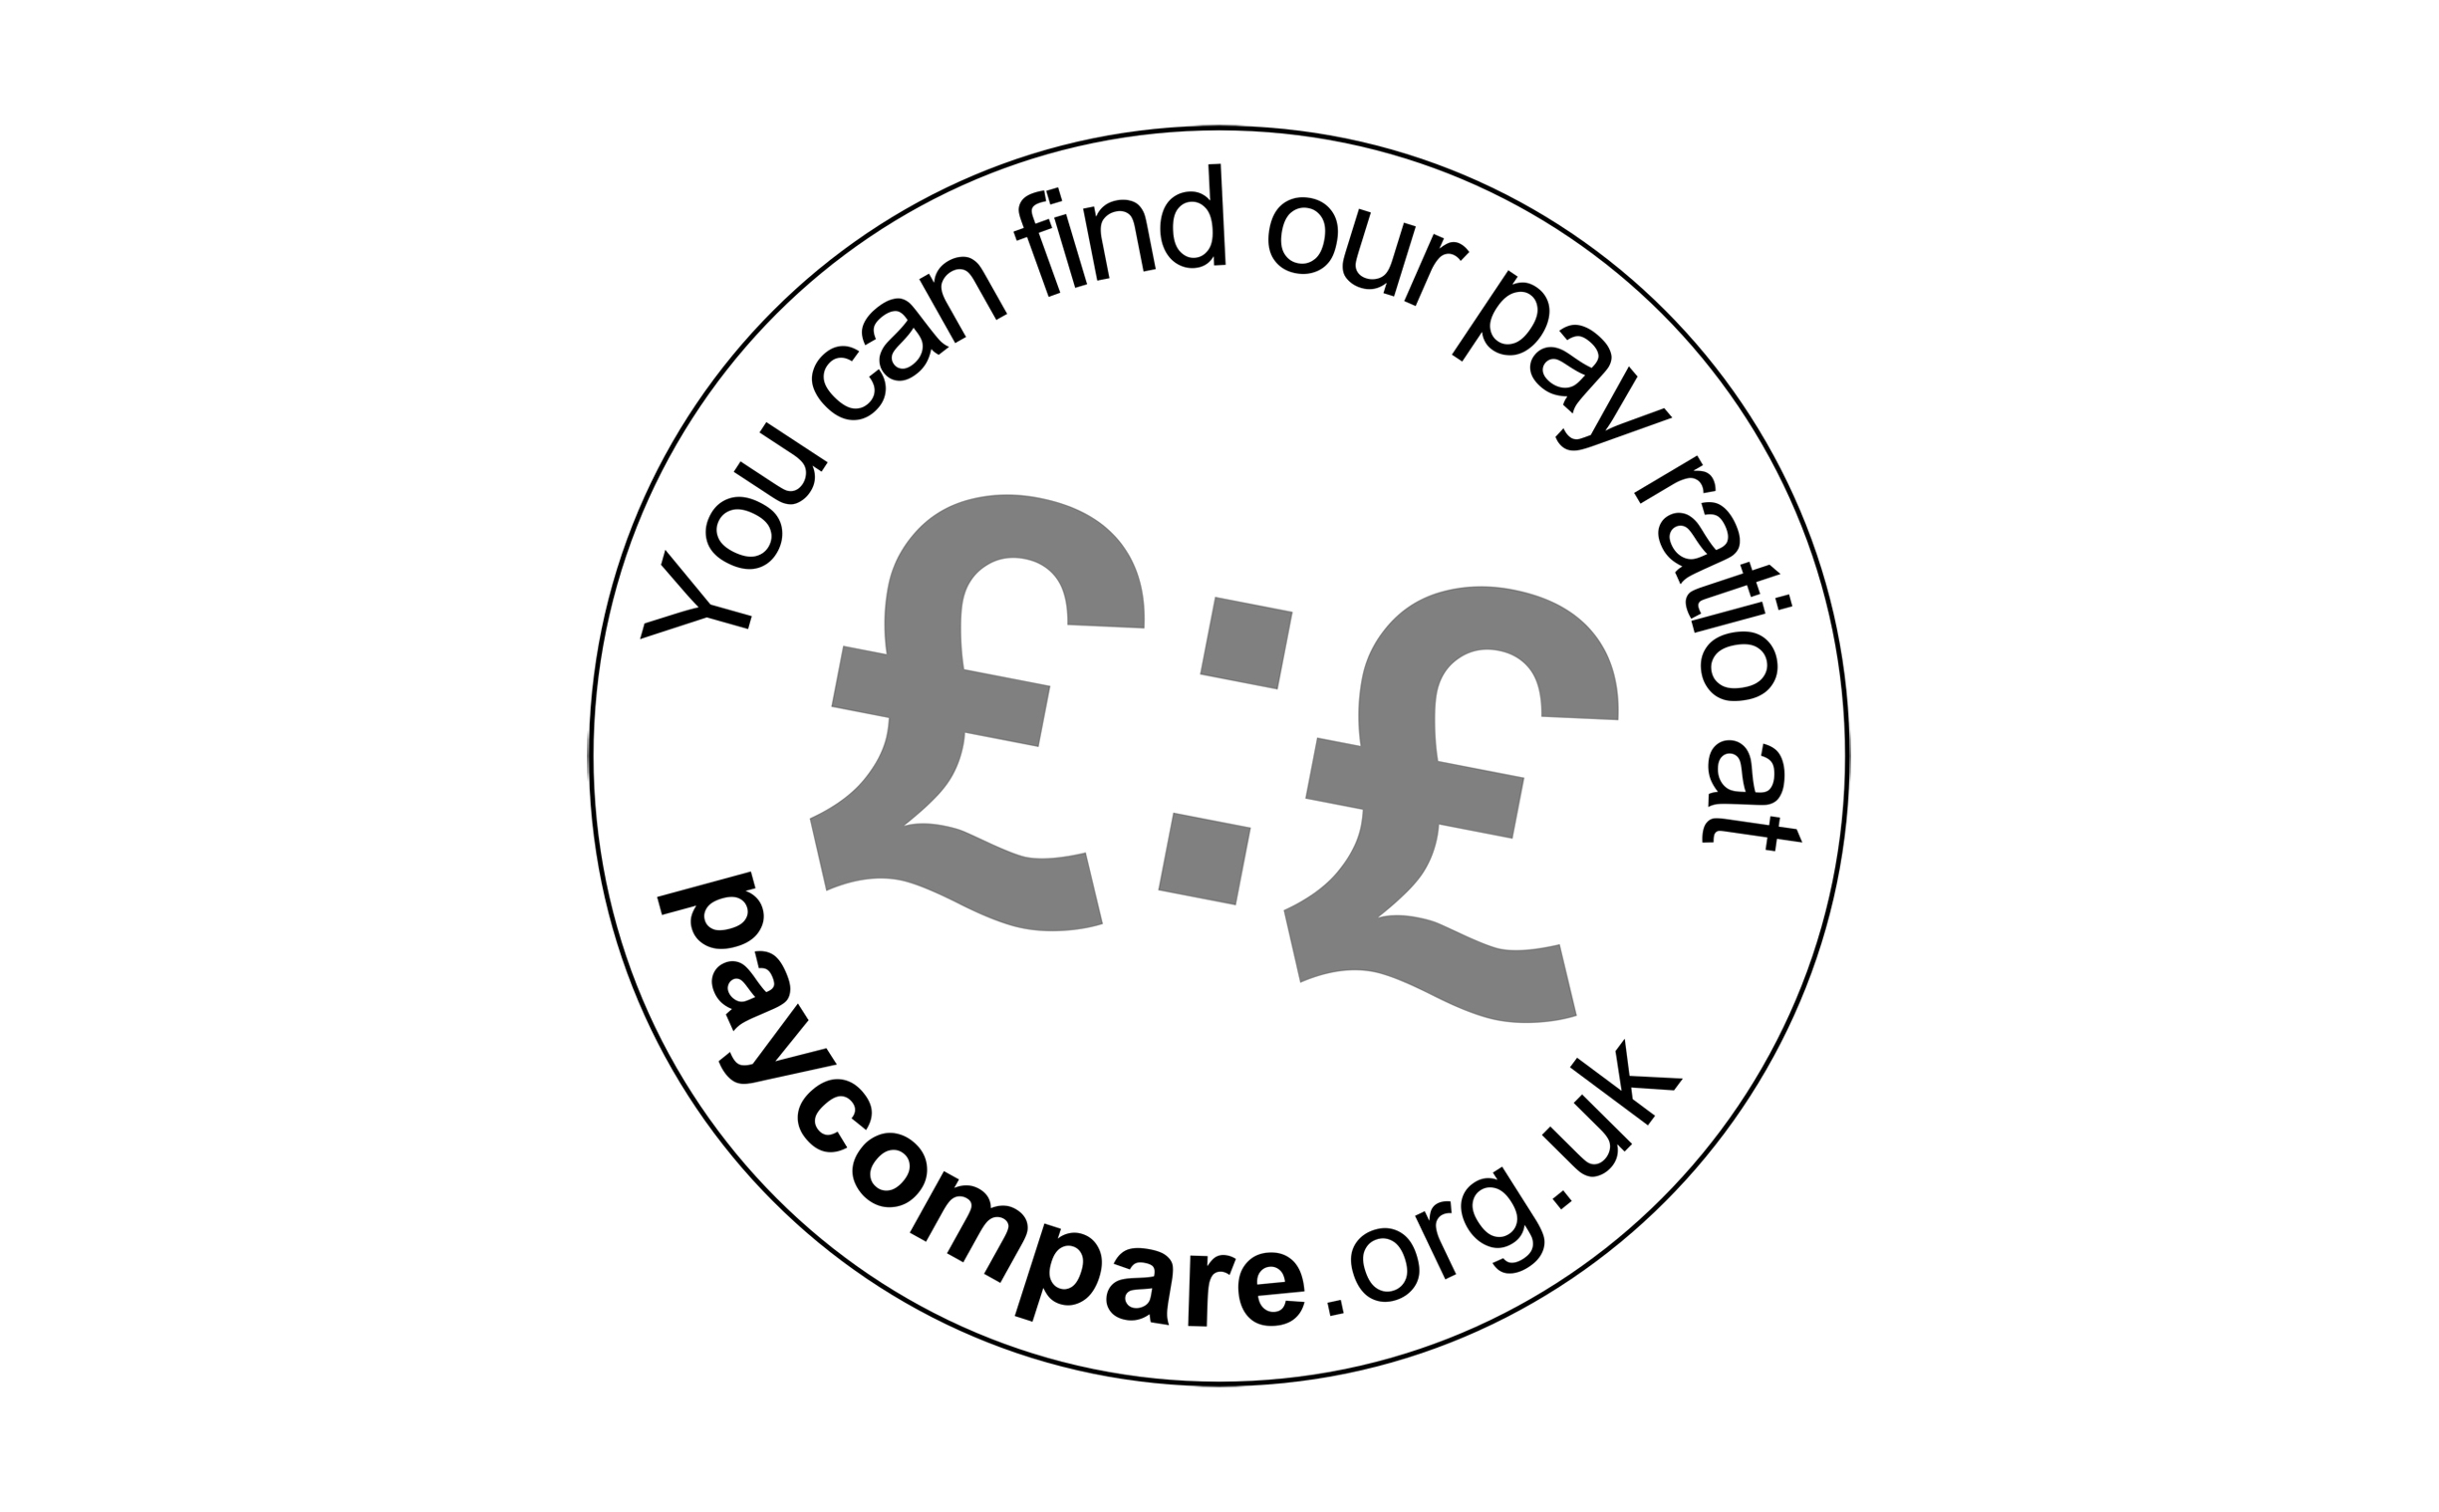 logo says "You can find our pay ratio at paycompare.org.uk